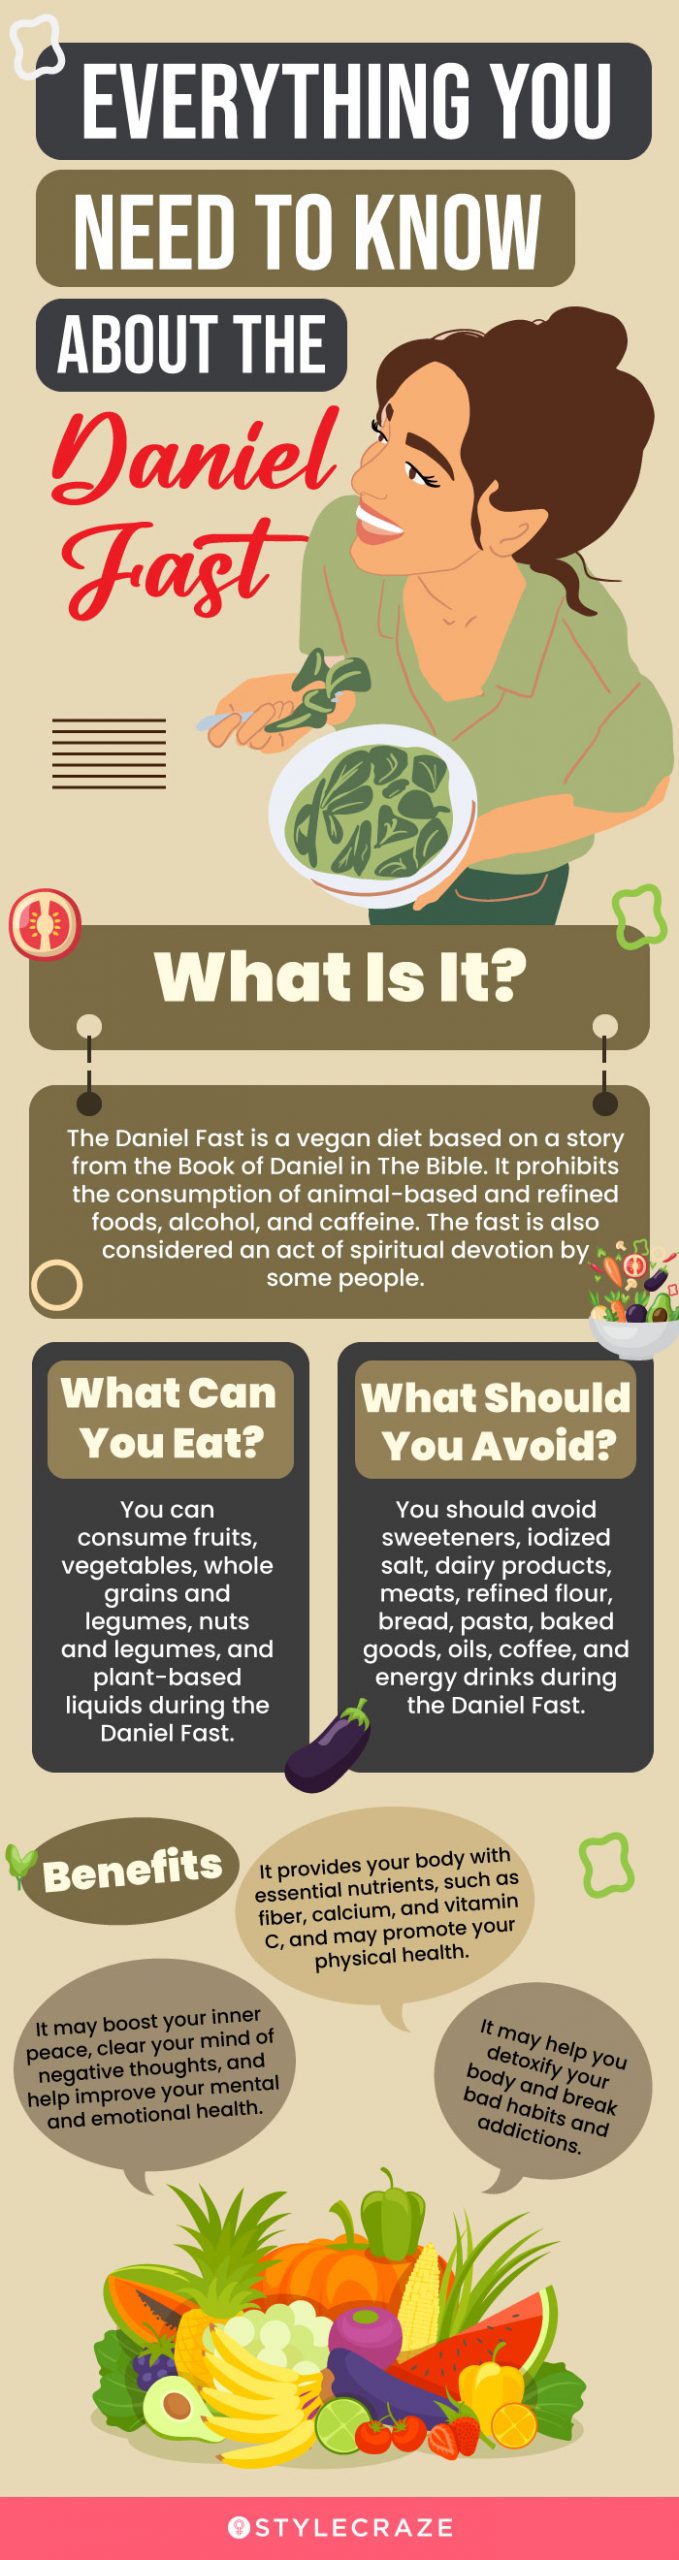 everything you need to know about the daniel fast (infographic)